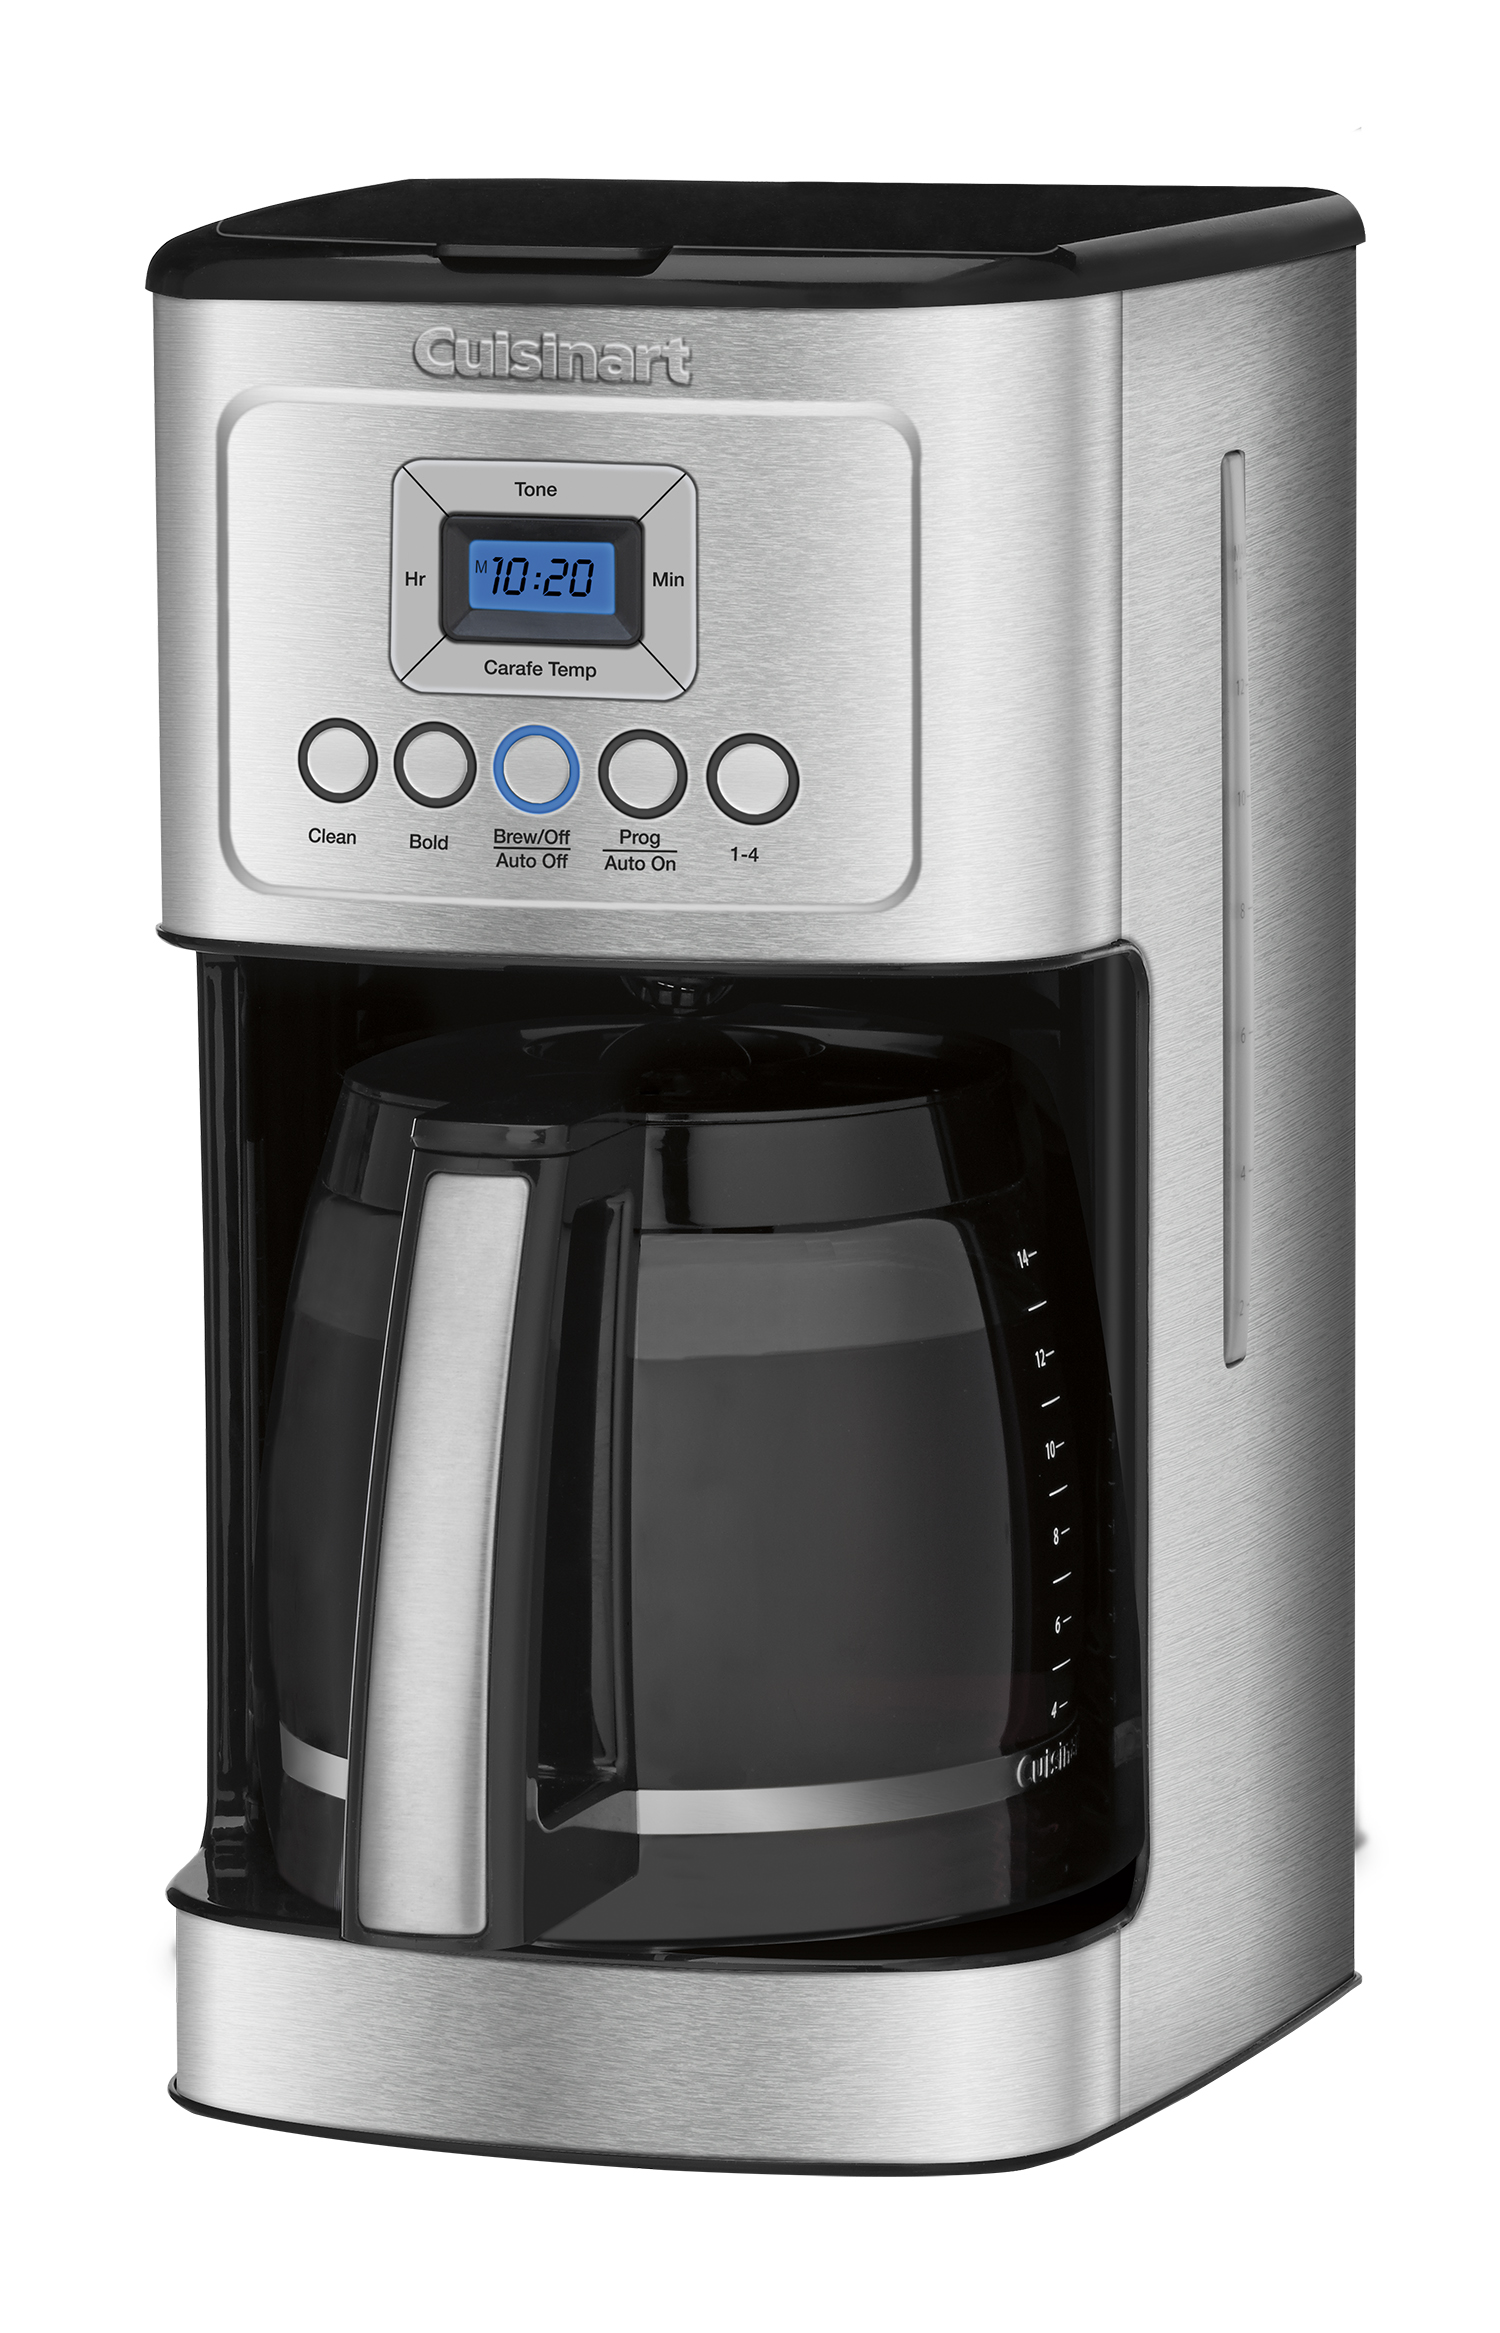 Cuisinart Perfectemp™ 14 Cup Programmable Coffeemaker, Silver - image 2 of 8